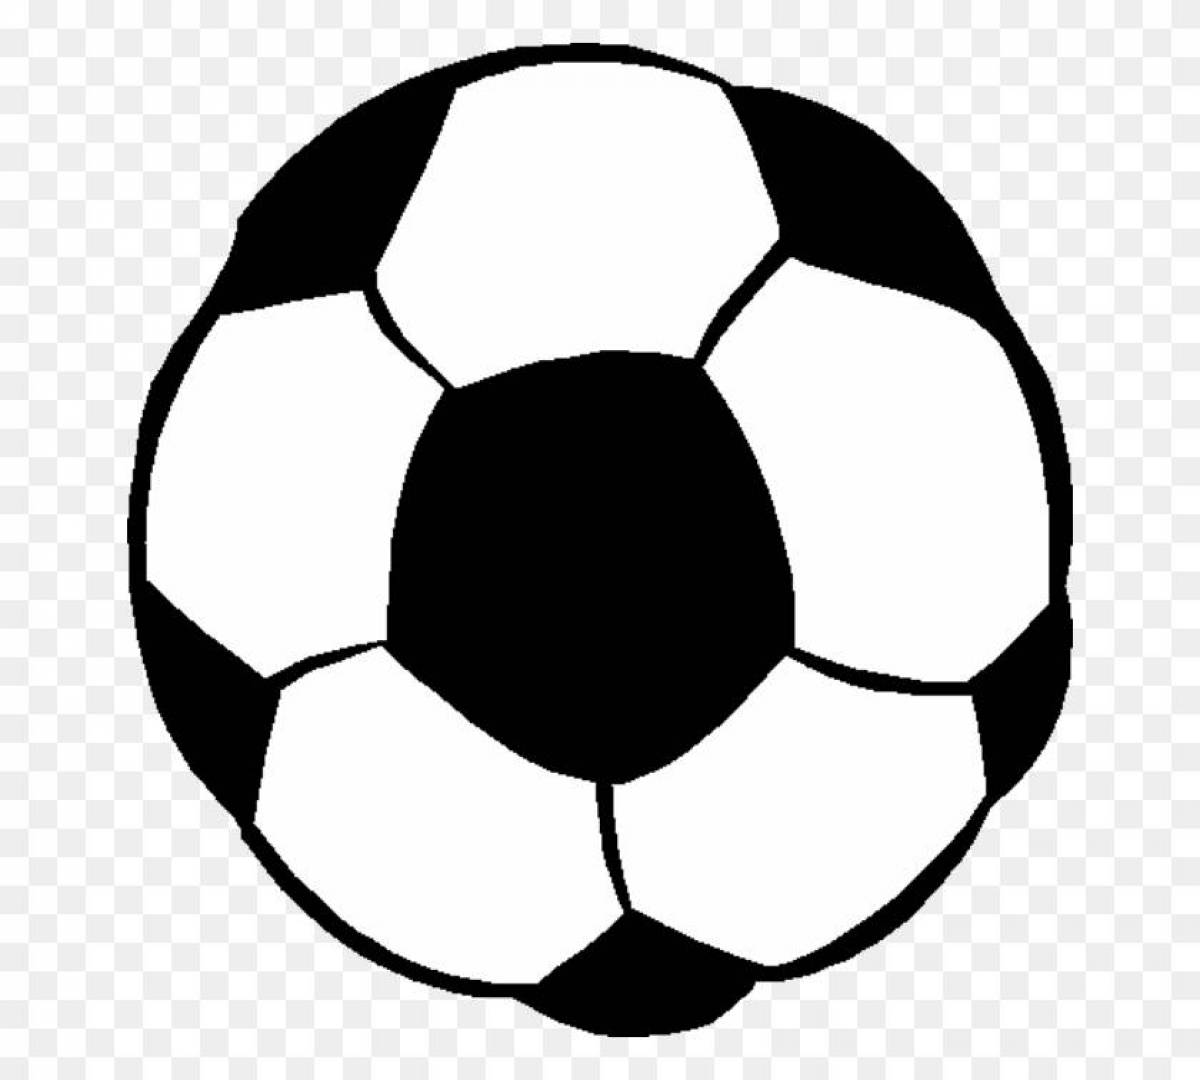 Coloring page bright soccer ball